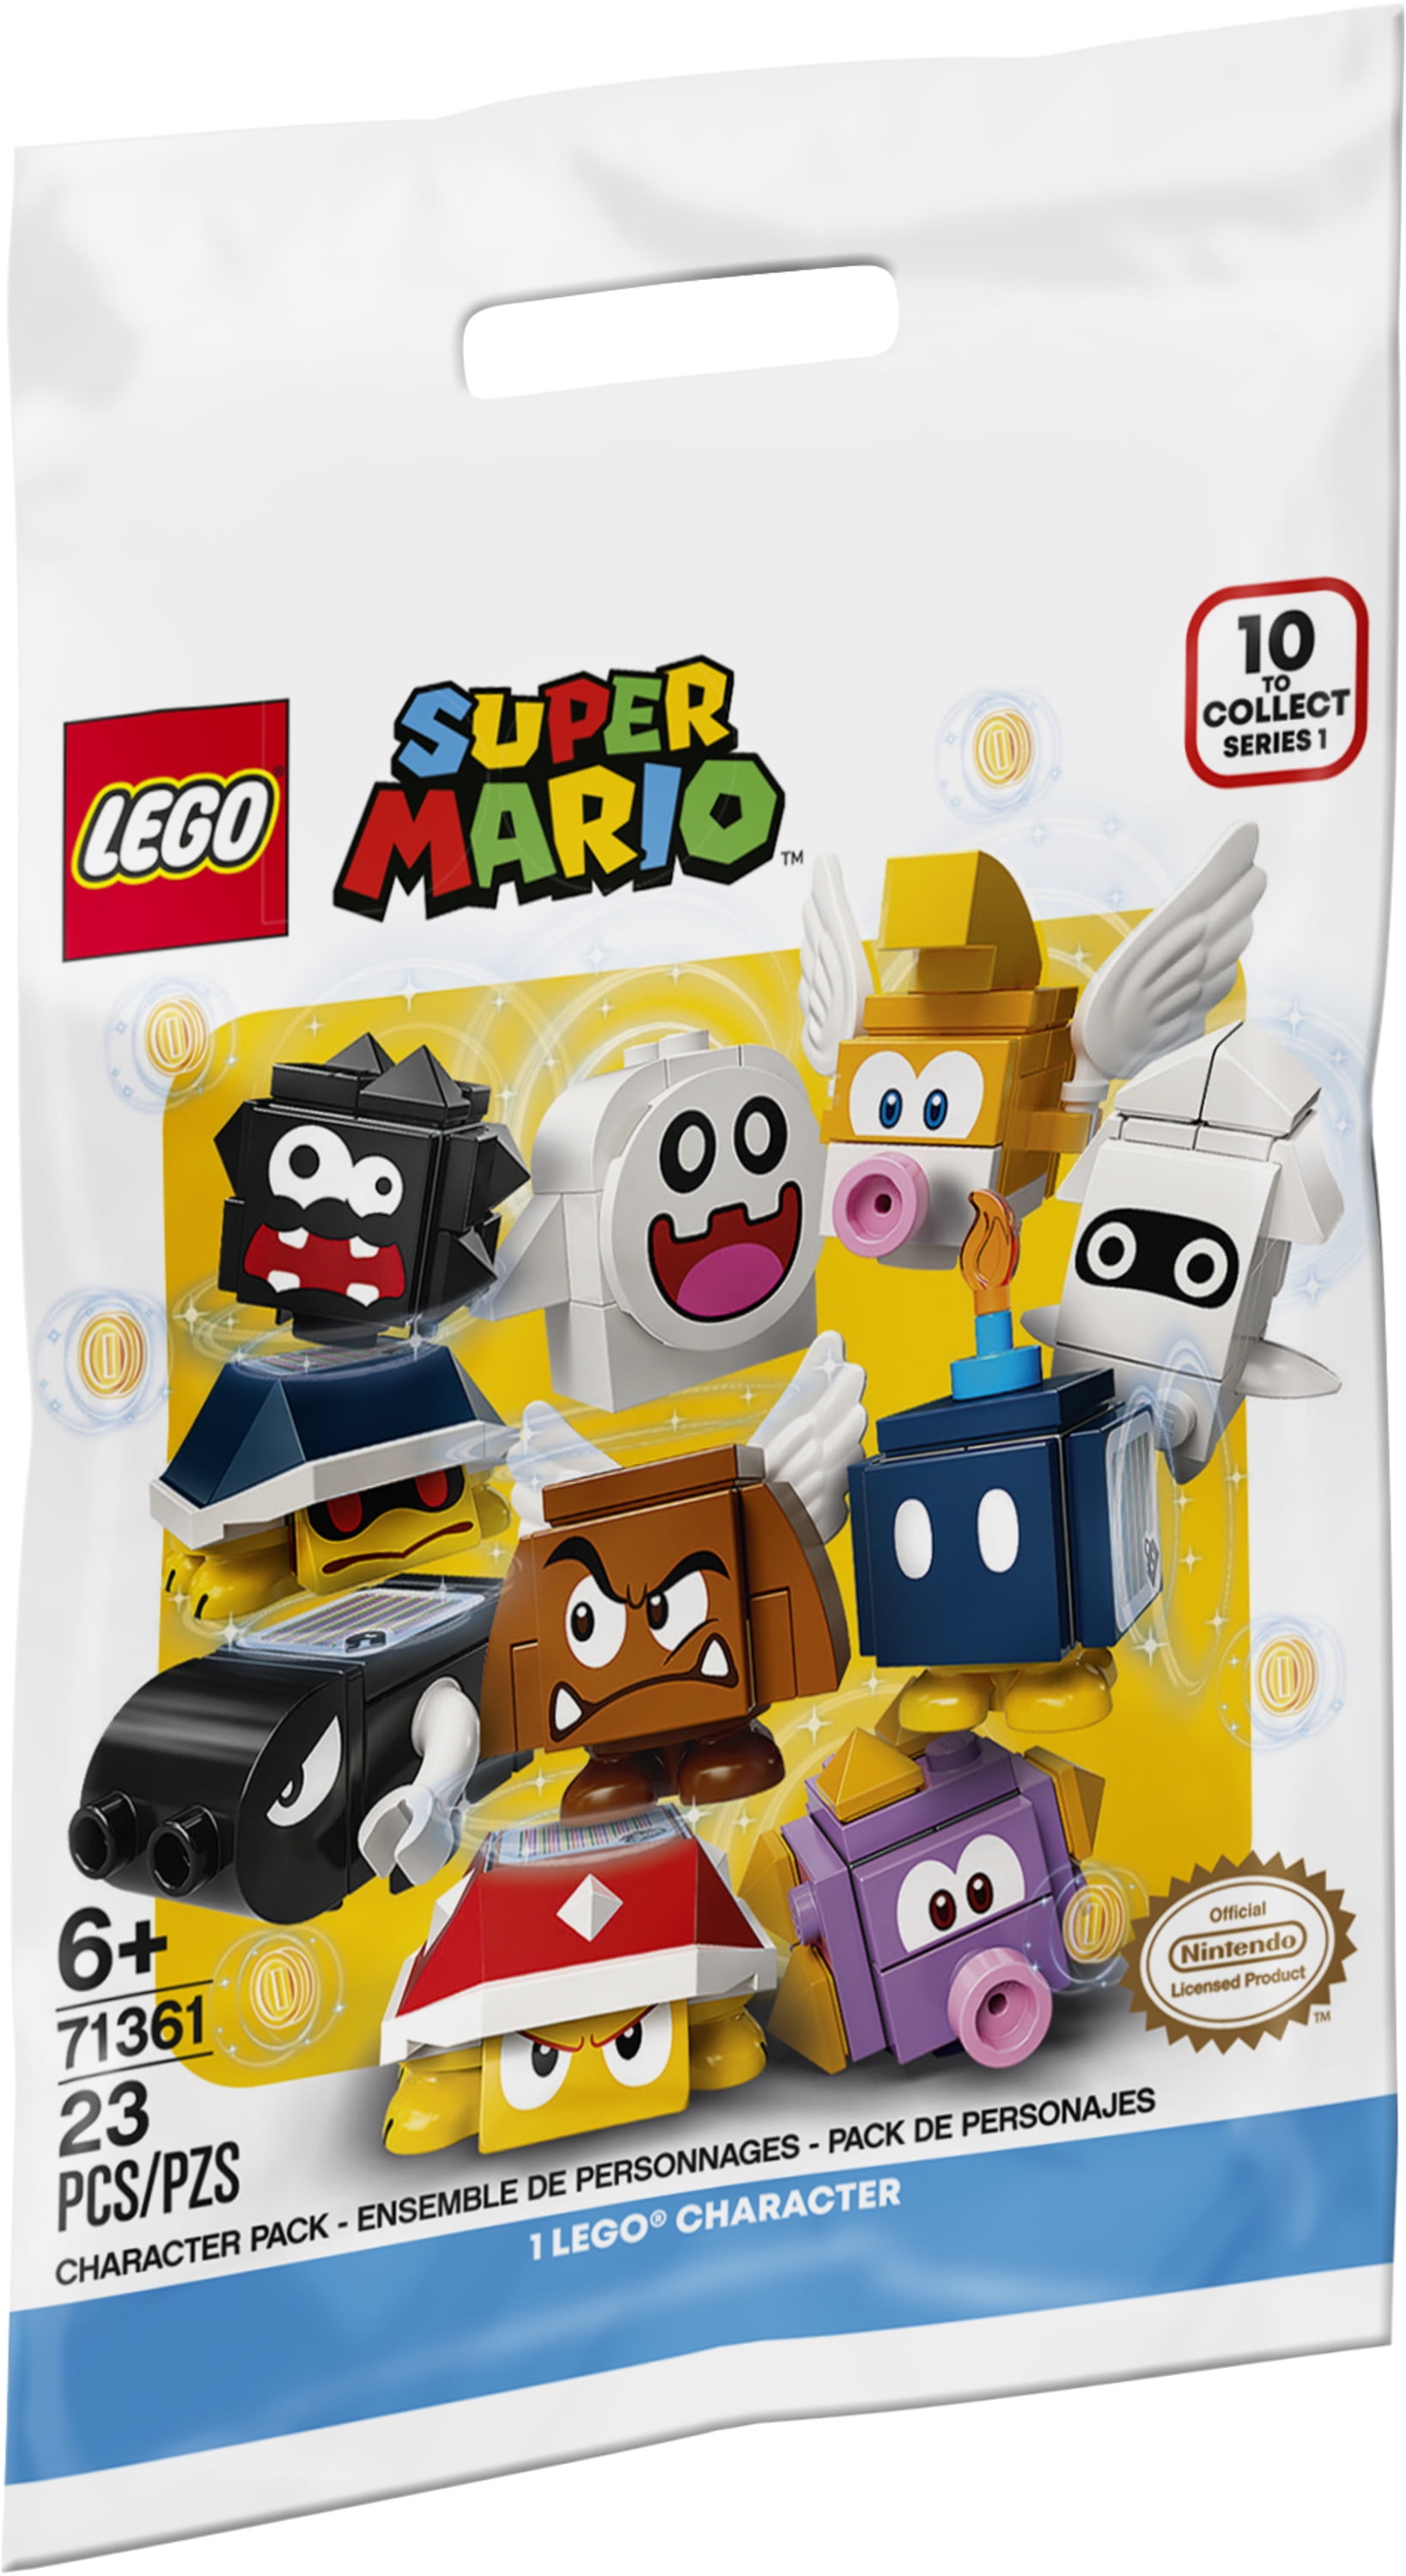 Lego 71361 Super Mario Character Pack Series 1 NEW sealed Pick a character 